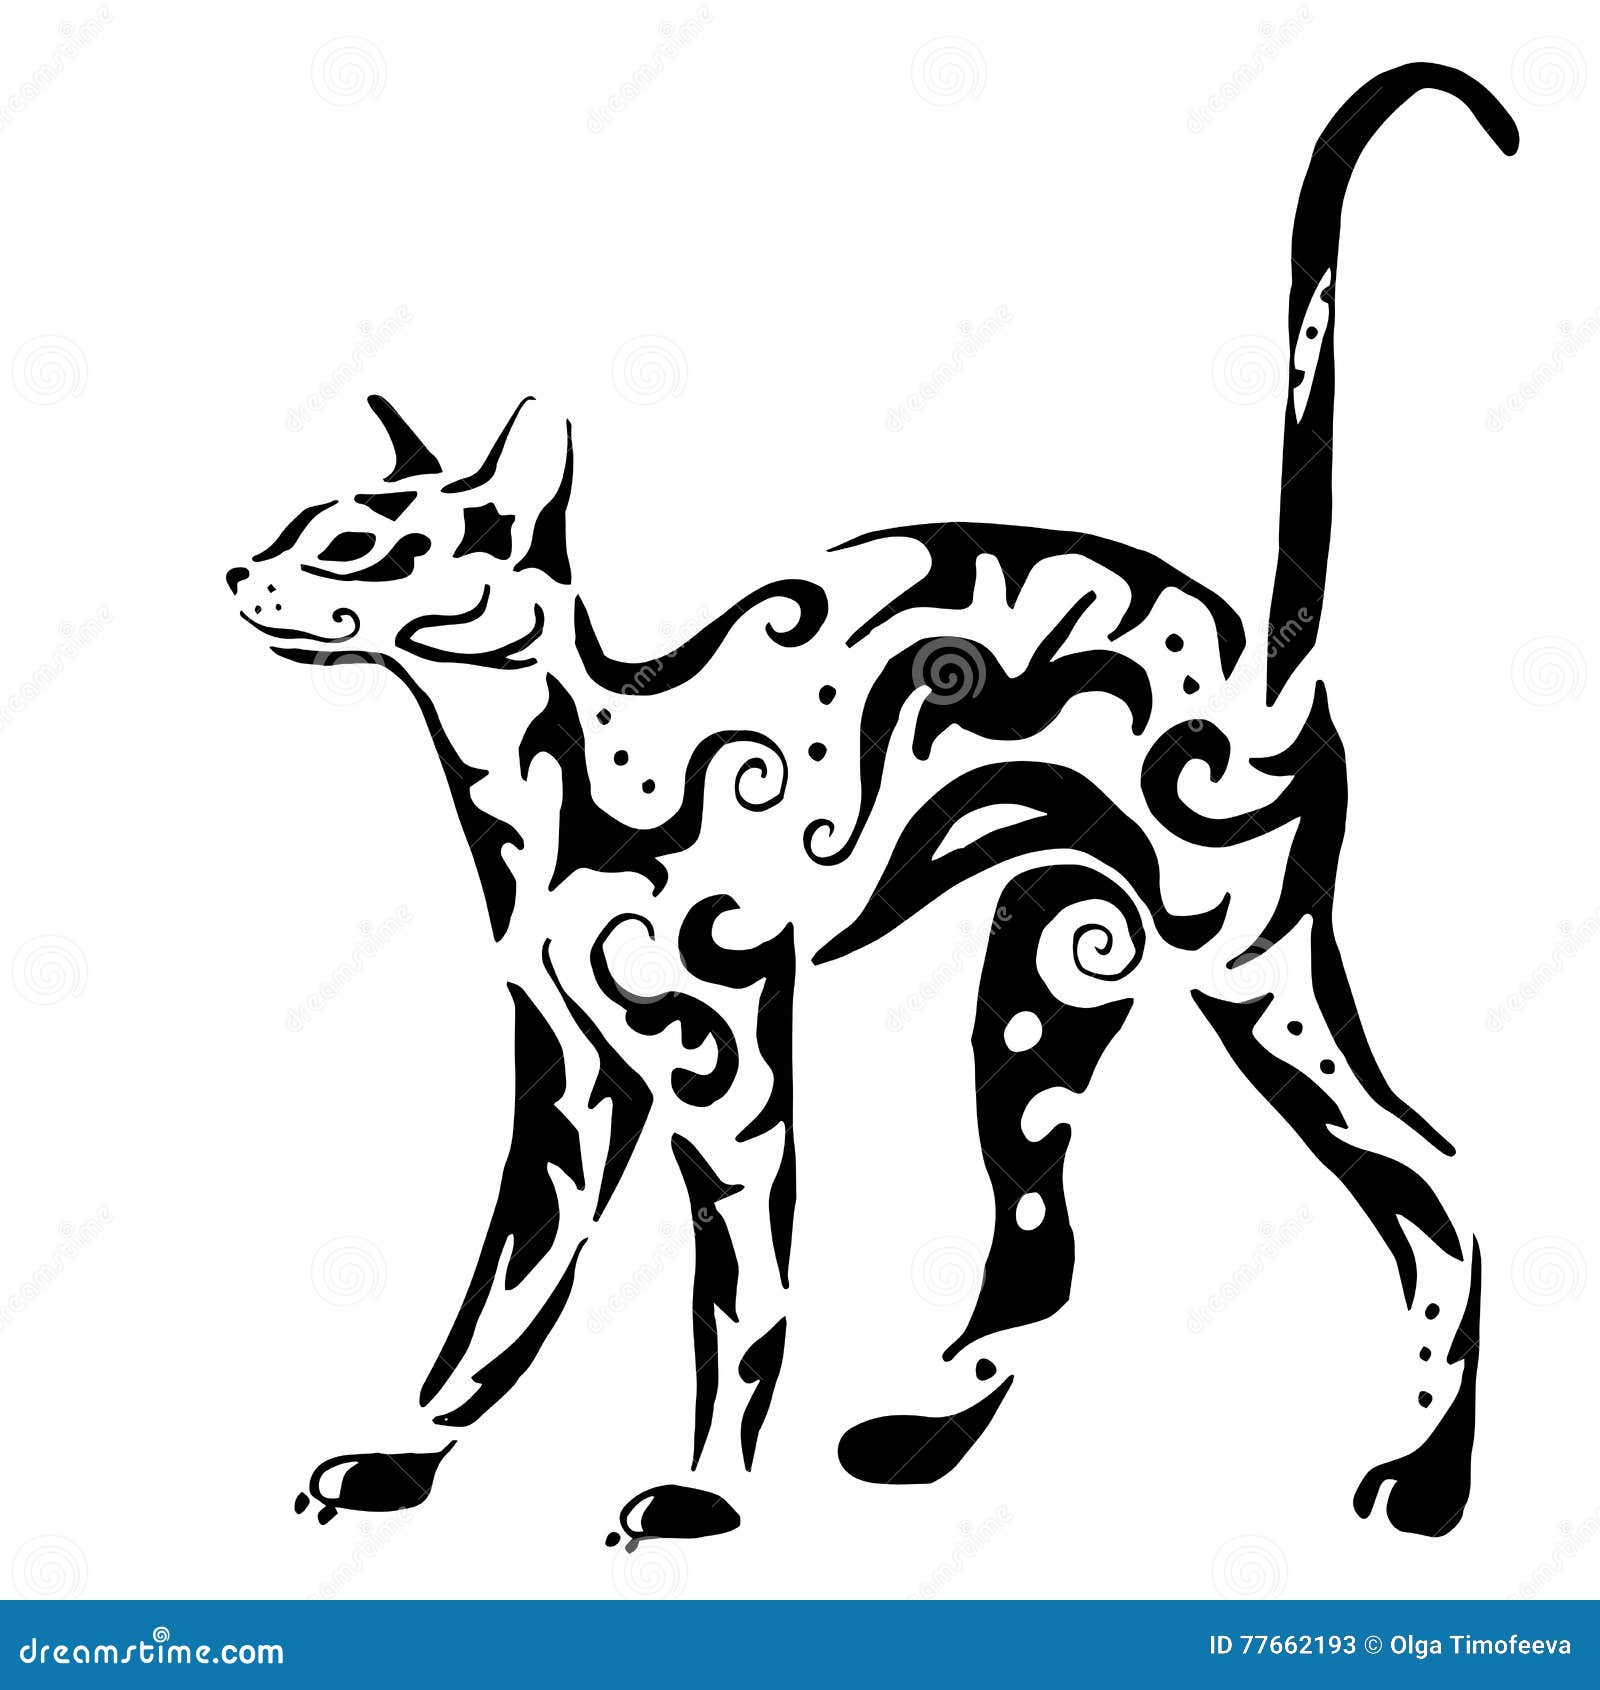 Graceful Egyptian cat stock vector. Illustration of graphic - 77662193